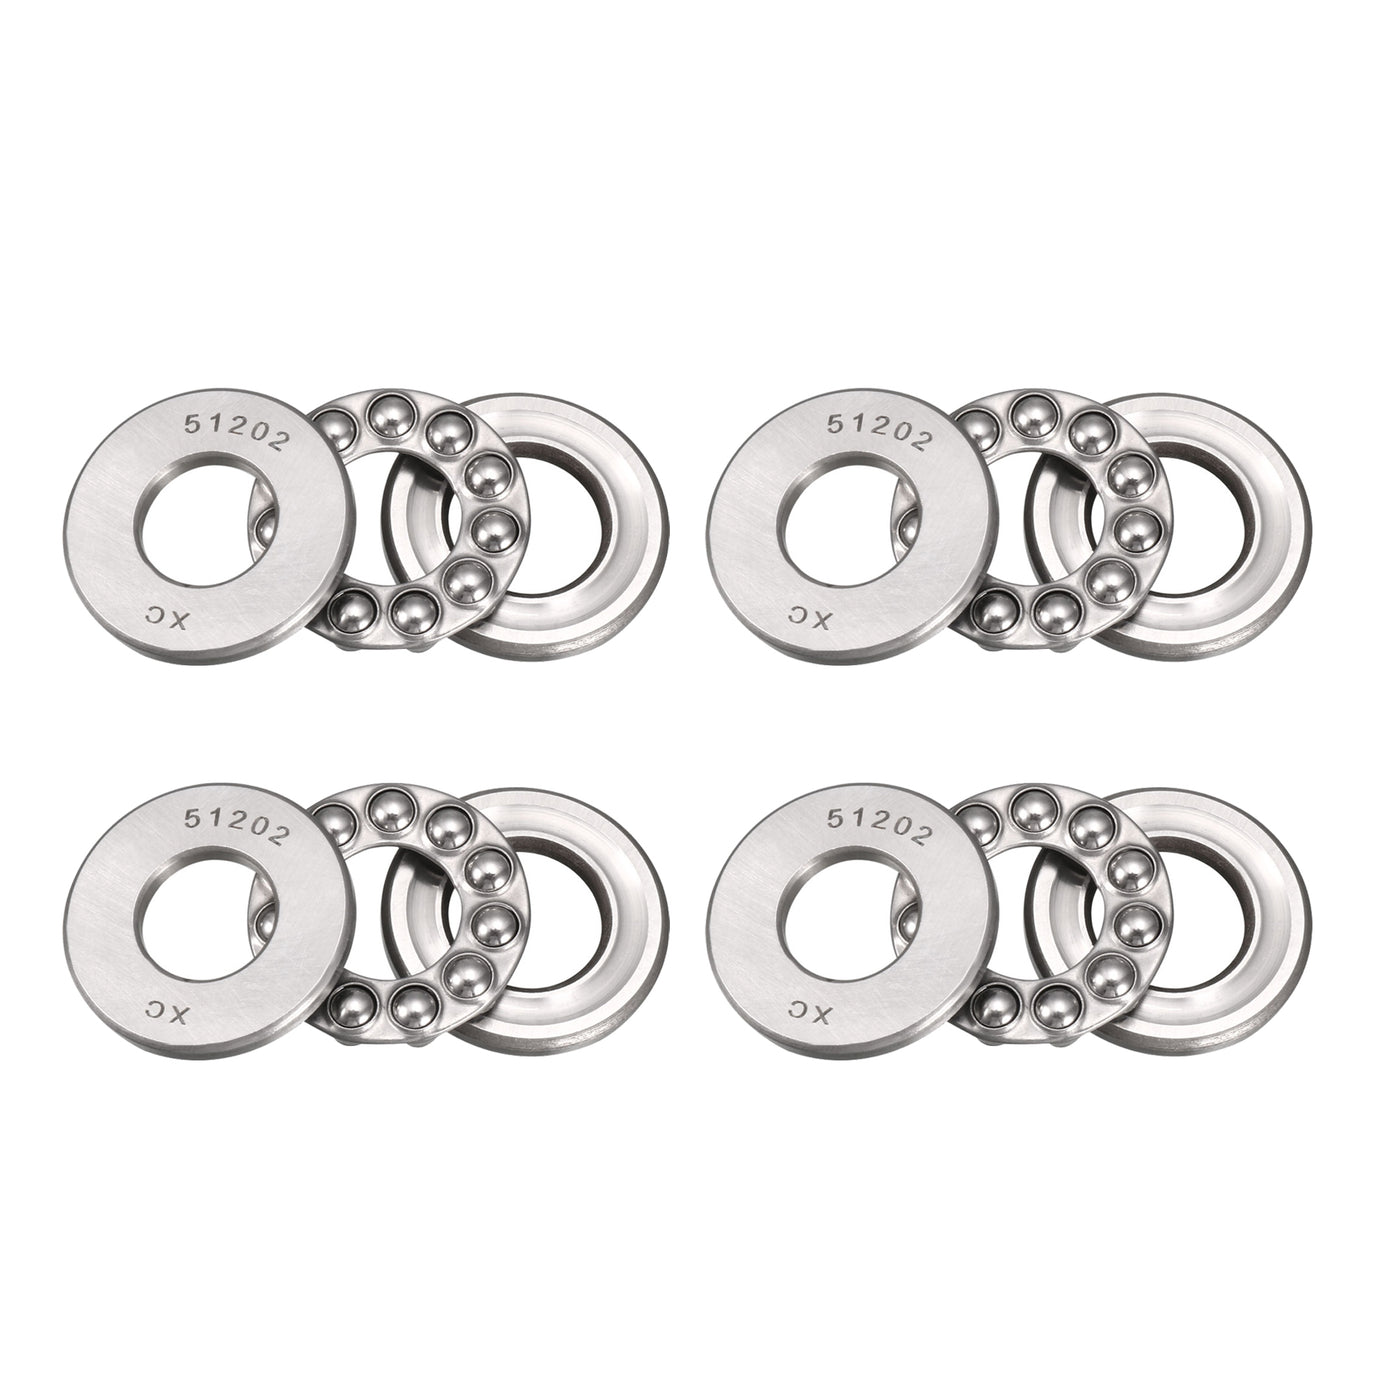 uxcell Uxcell 51202 Miniature Thrust Ball Bearing 15x32x12mm Chrome Steel with Washer 4pcs